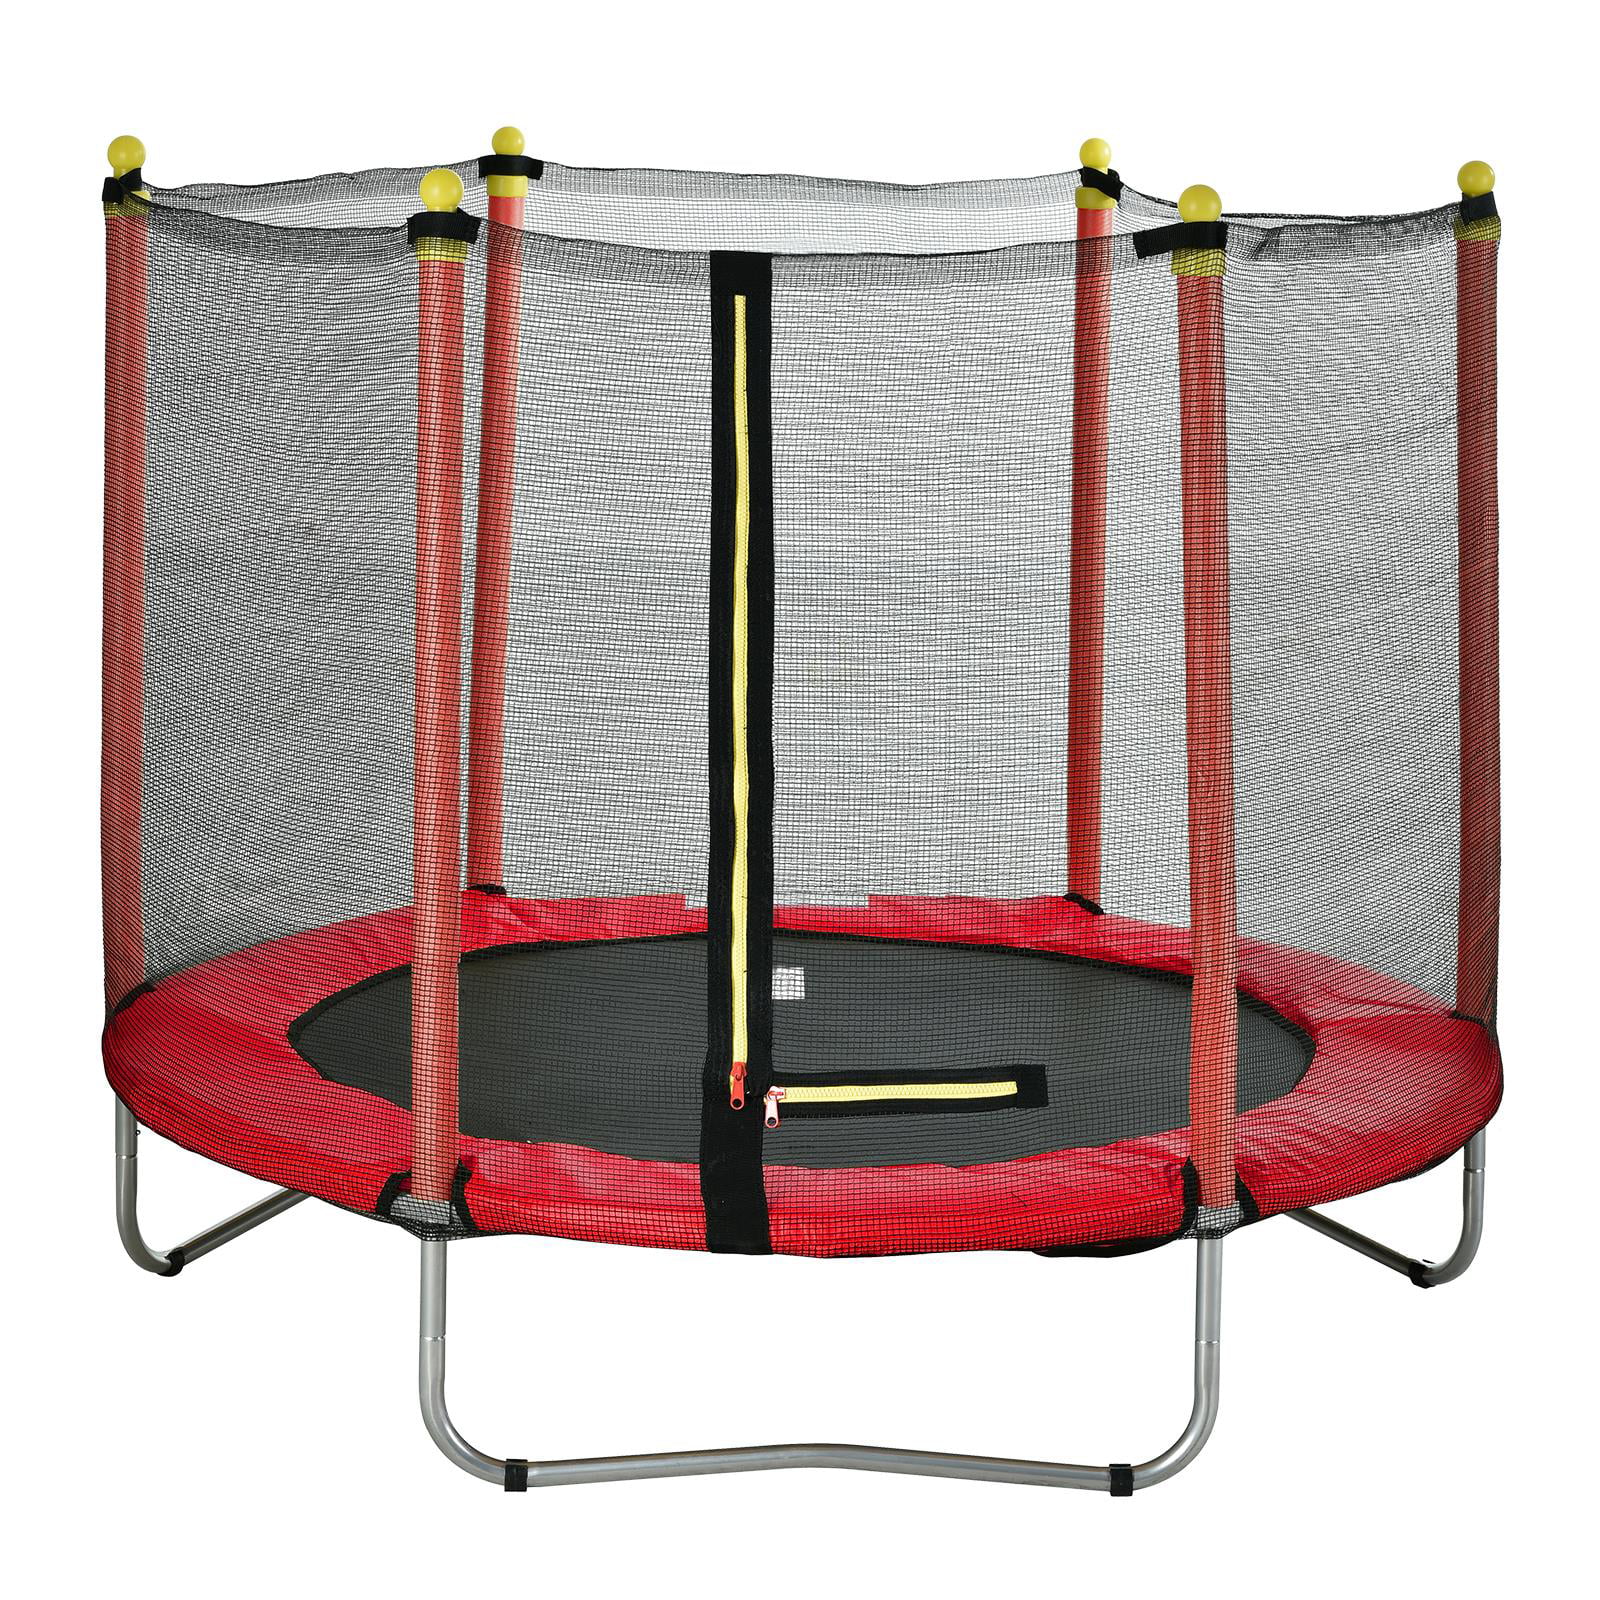 Zimtown My First Small 60 inches Kids Mini Round Trampoline Combo, with Surround Enclosure, Red